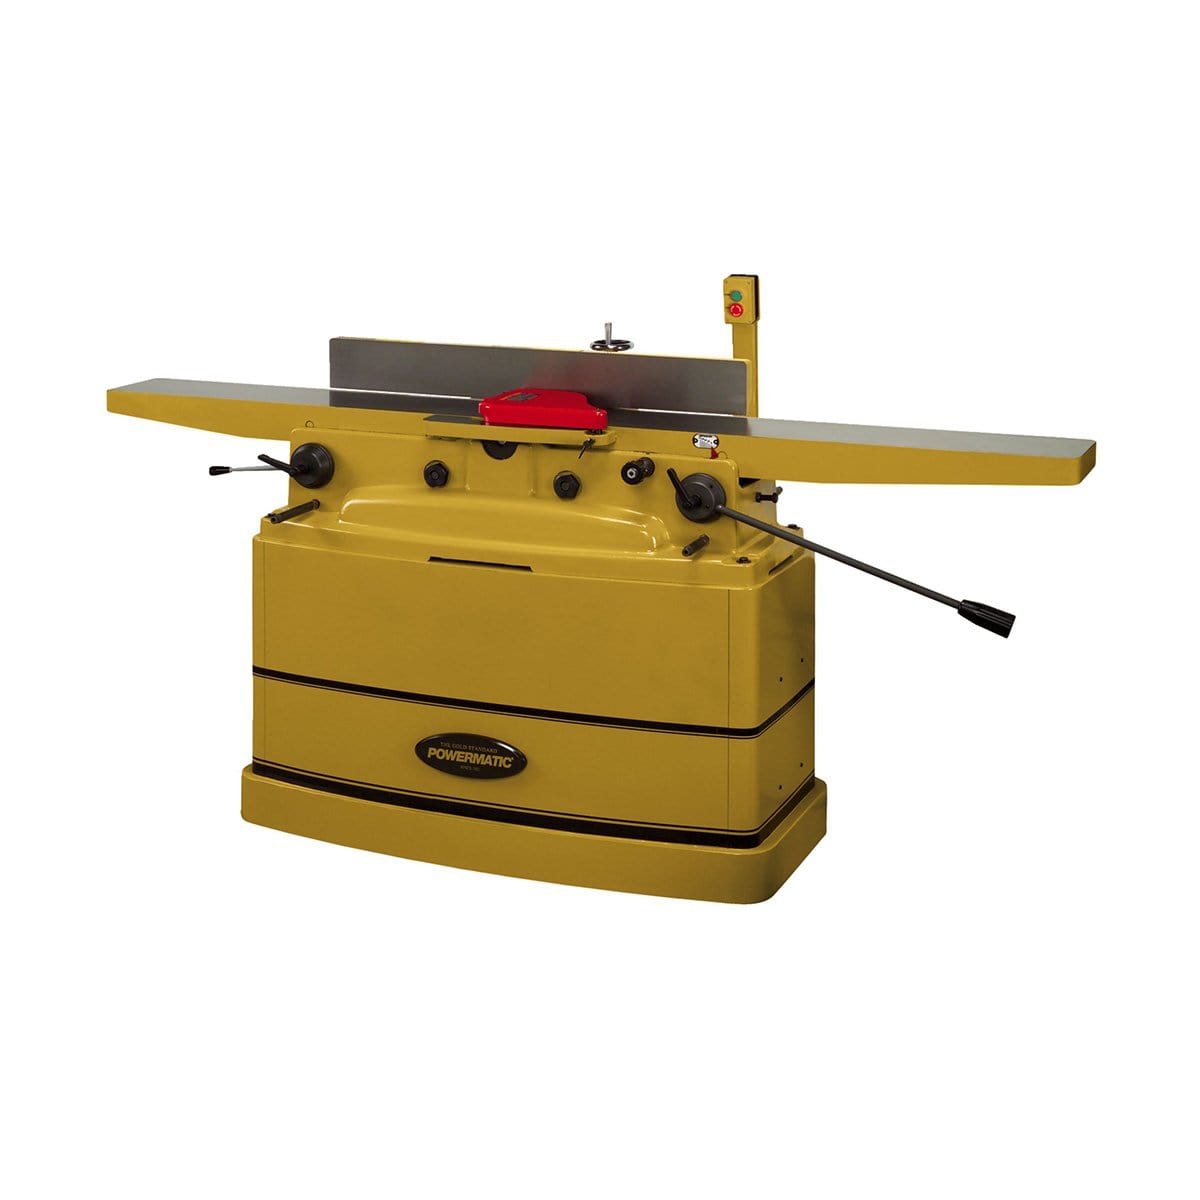 Powermatic 1610082 Jointer PJ-882HH 8" Jointer with Helical Head